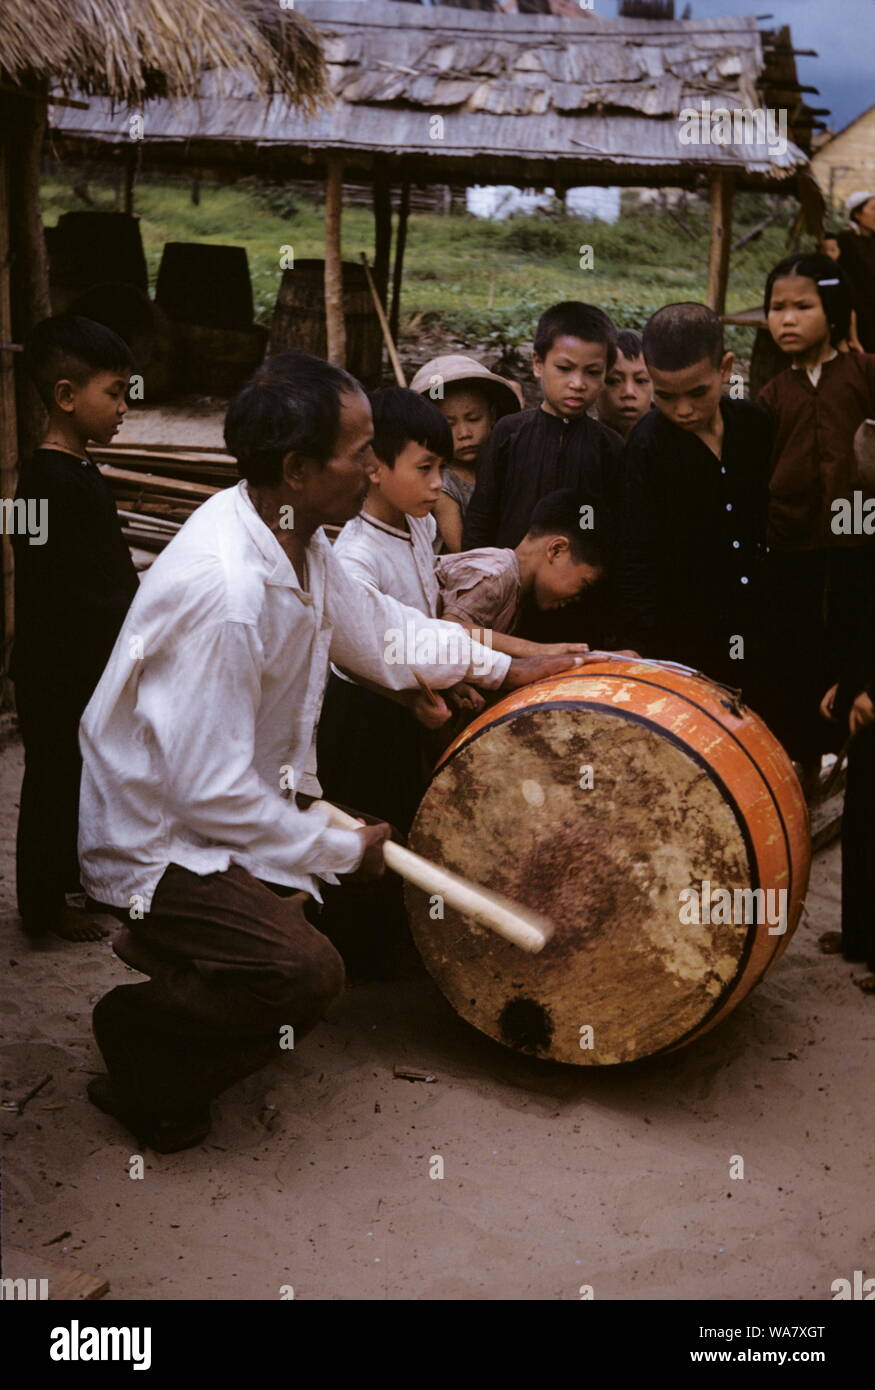 AJAXNETPHOTO. 1955 (APPROX). INDO CHINA. VIETNAM. (IN-COUNTRY LOCATION UNKNOWN.) - BEATING THE DRUM - YOUNG PEASANT CHILDREN LOOK ON AS A MAN BANGS A DRUM. PHOTO:JEAN CORRE/AJAXREF:JC1955 Stock Photo